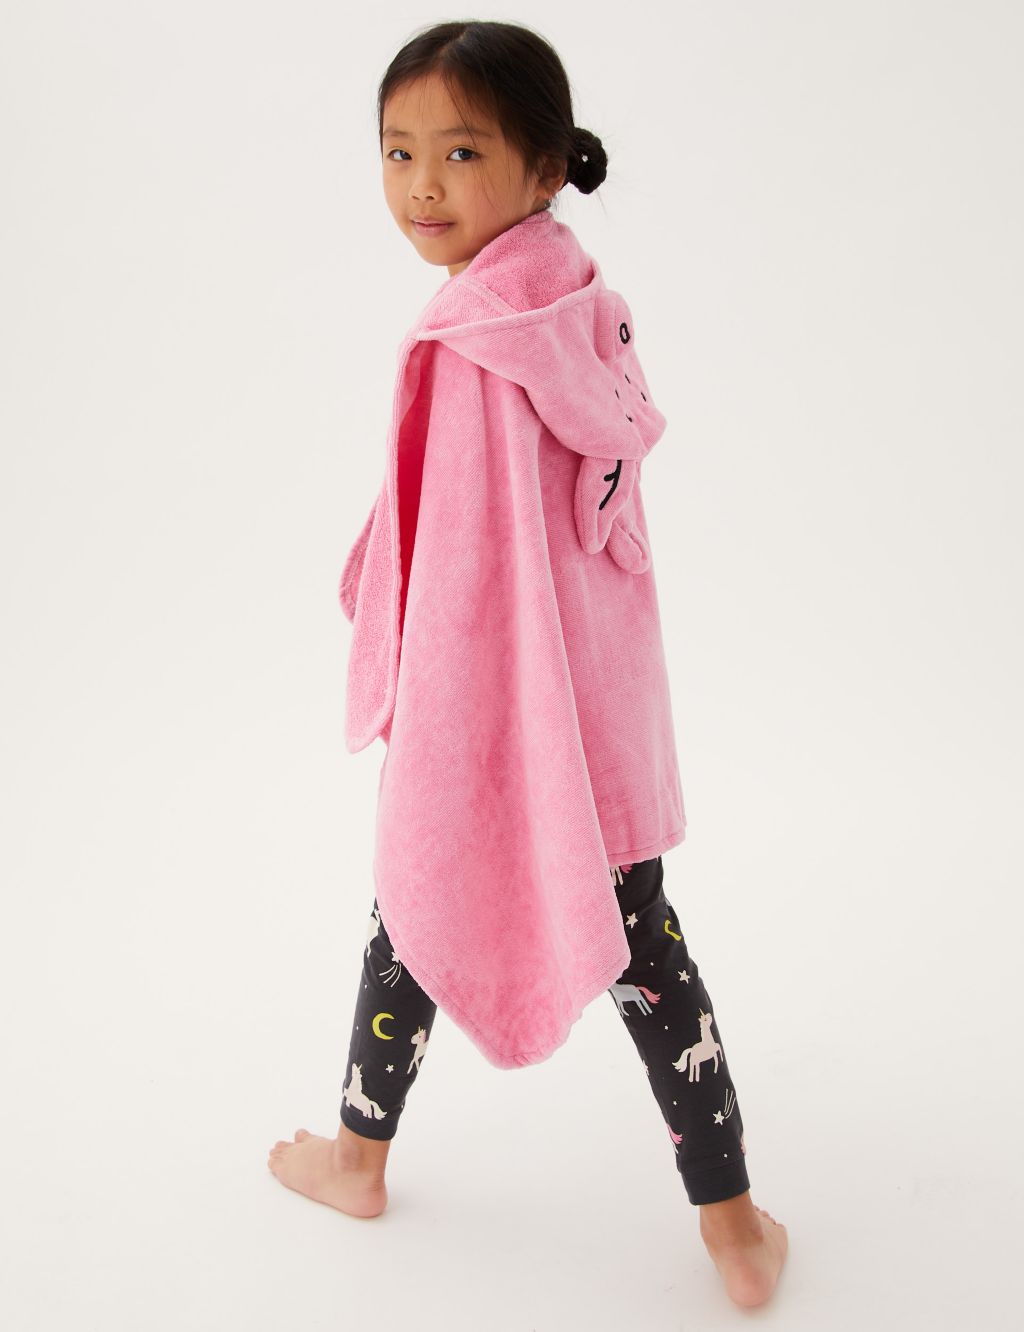 Pure Cotton Percy Pig™ Kids Hooded Towel image 6